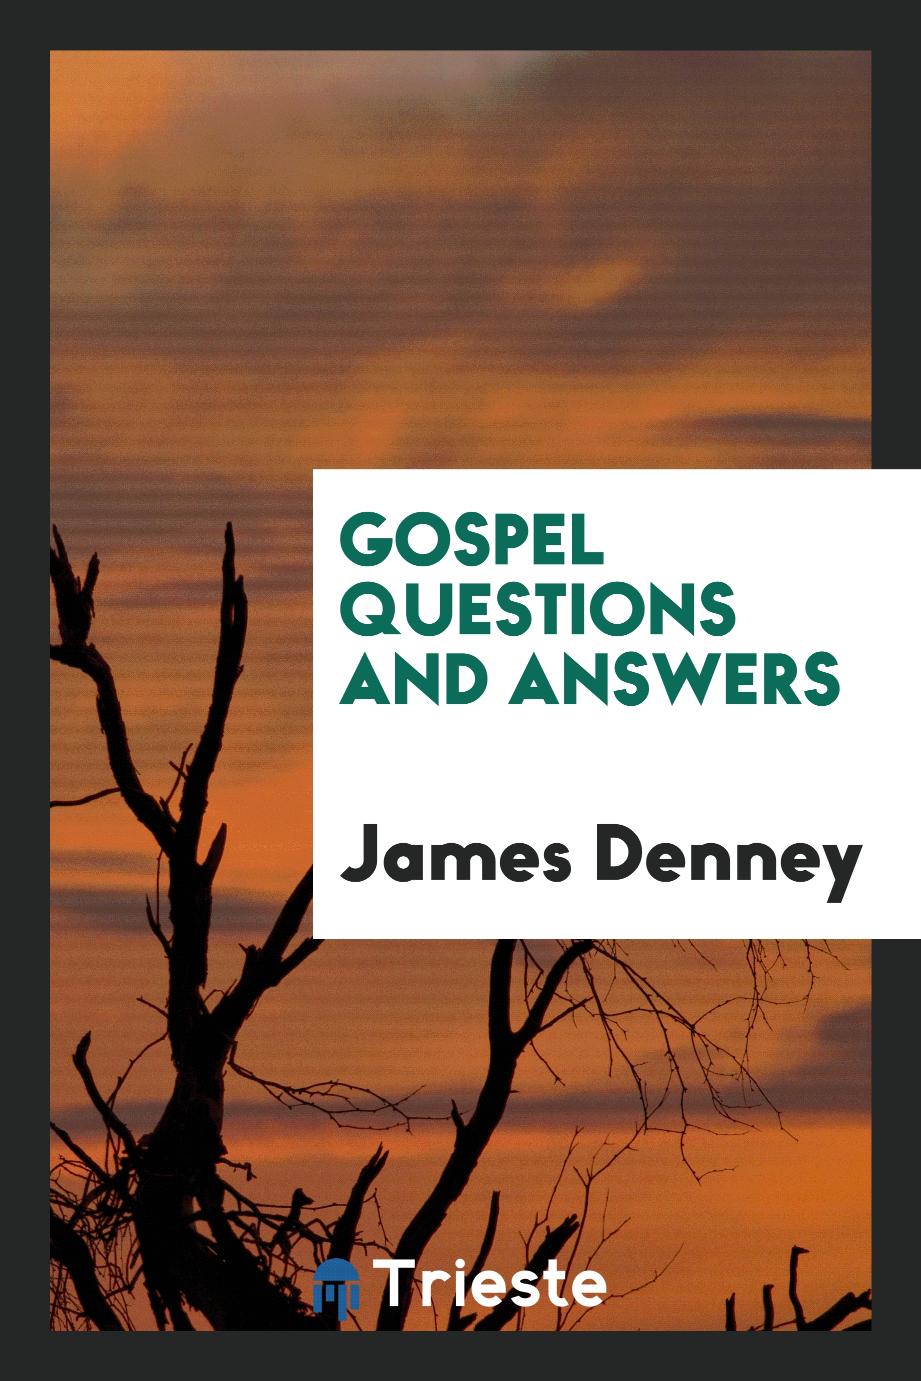 Gospel questions and answers